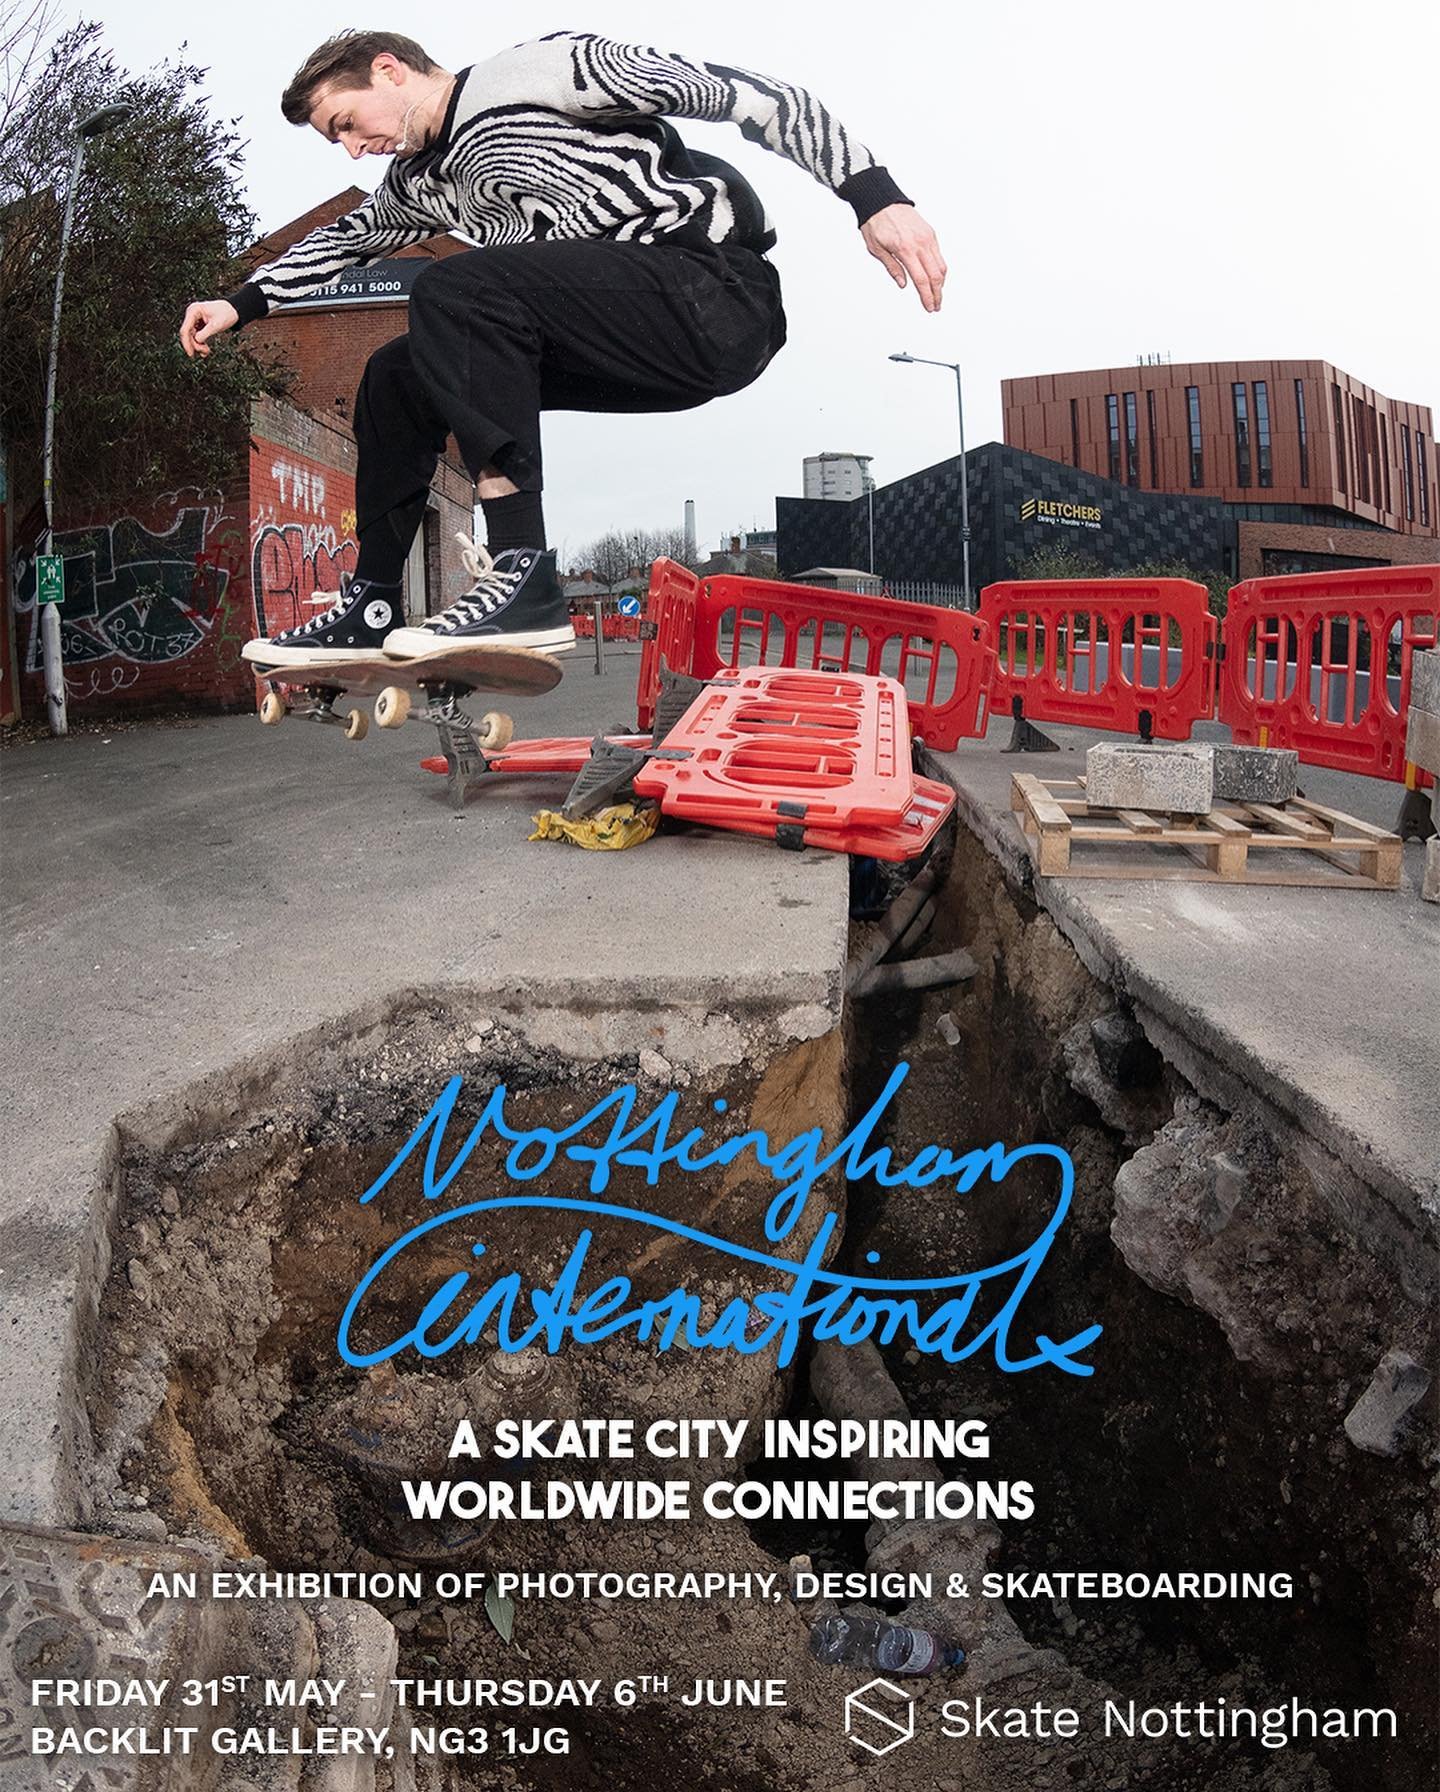 Nottingham, international - a new exhibition of photography, design &amp; skateboarding by Skate Nottingham!⁣
⁣
Launching Friday 31st May at @backlitgallery, this exhibition focuses on Nottingham as a skate city that inspires worldwide connections. ⁣